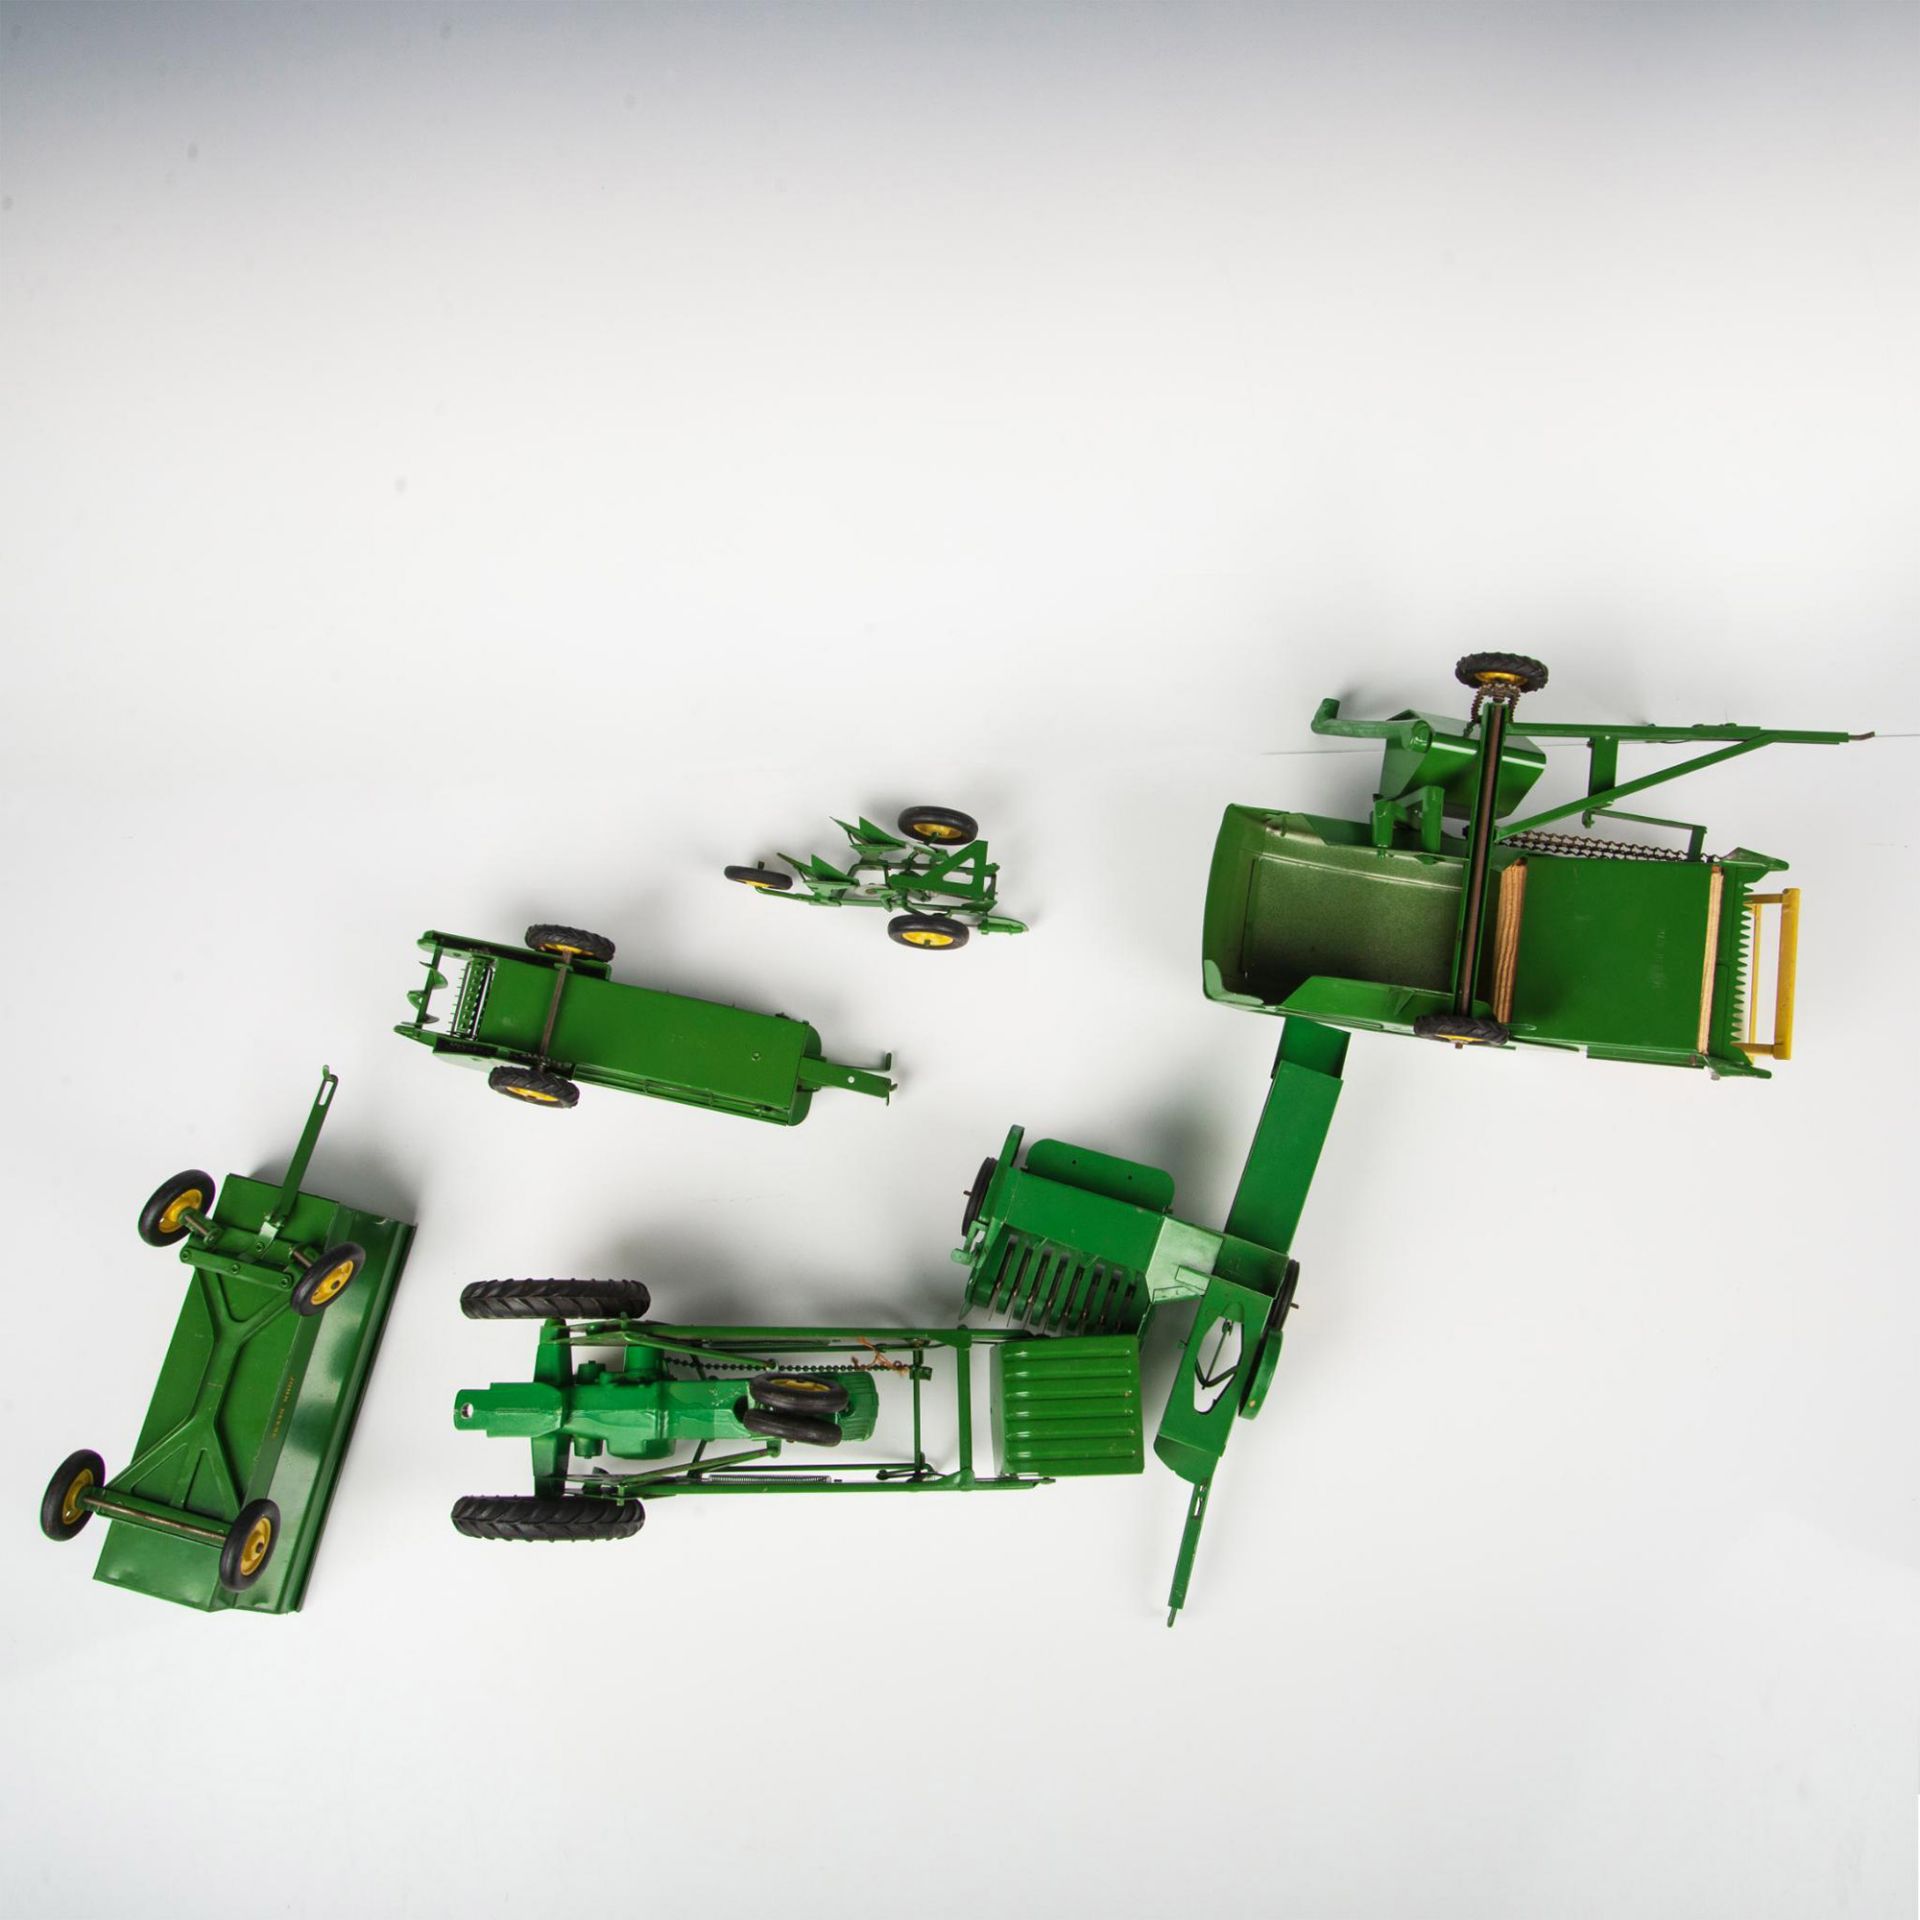 6pc John Deere Metal Toy Tractor and Equipment - Image 4 of 8